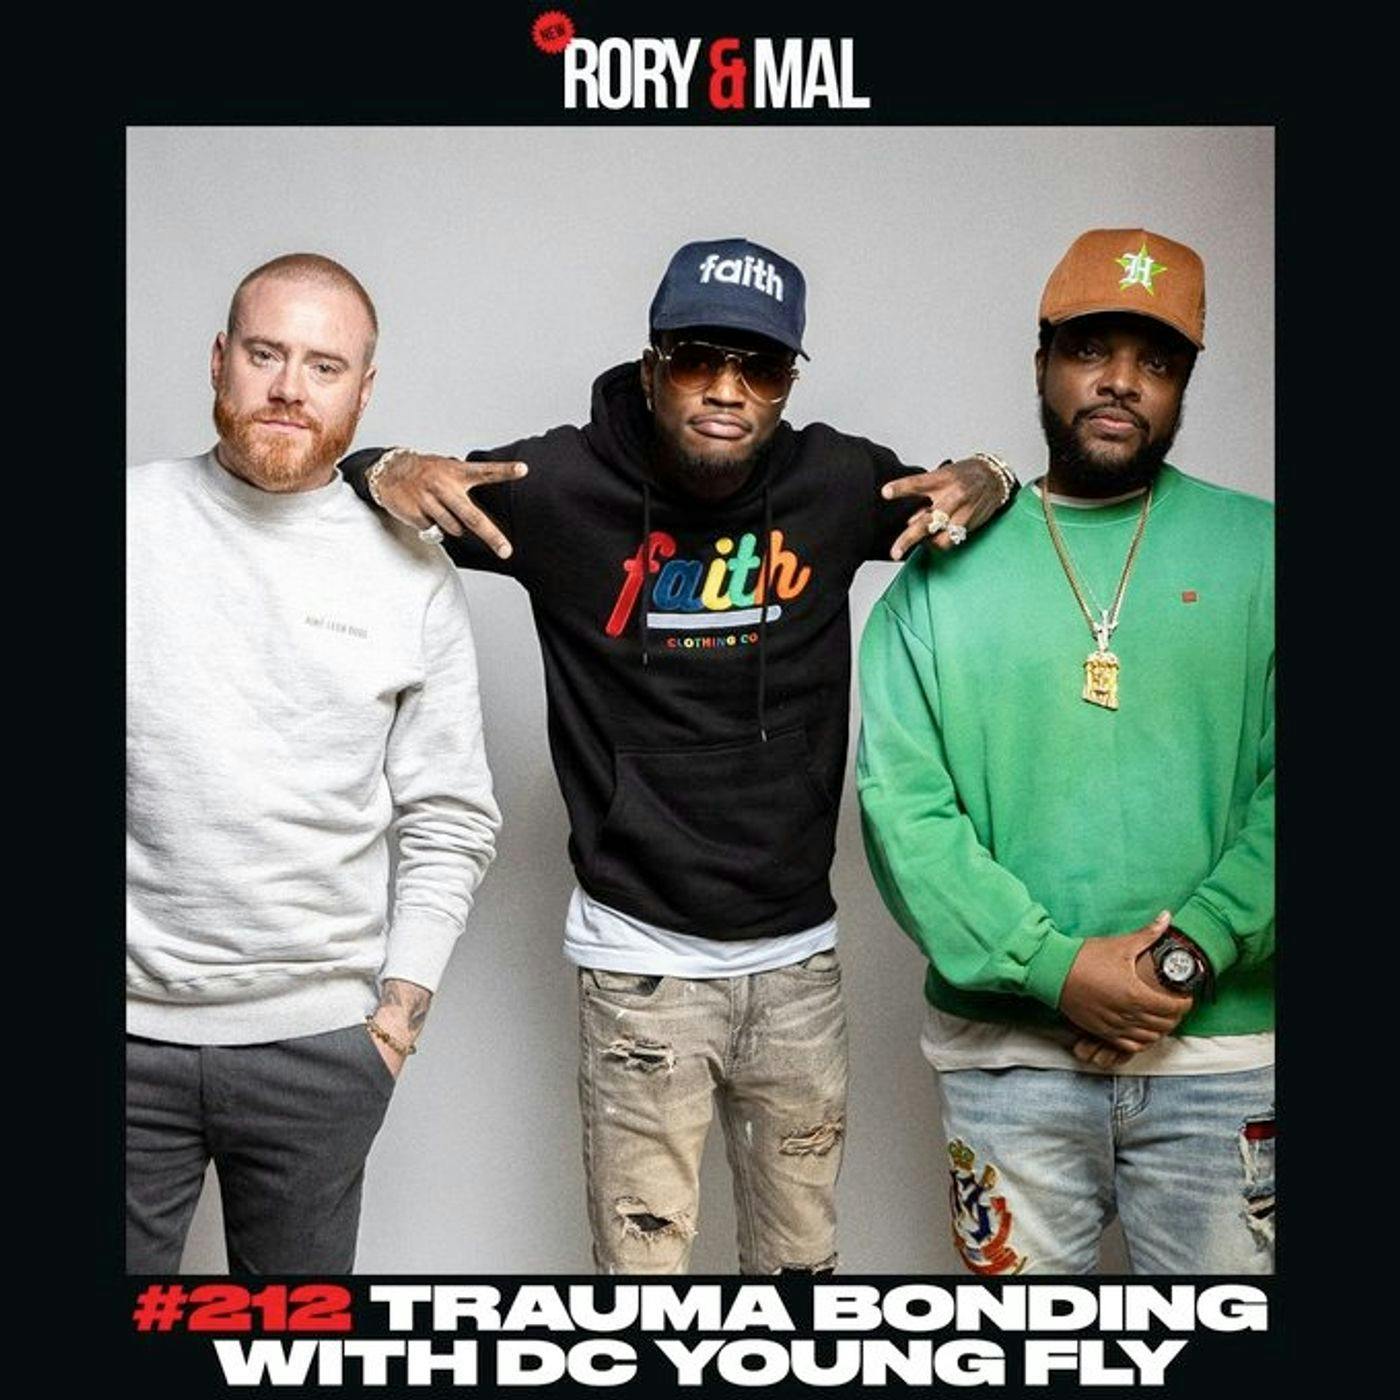 Episode 212 | Trauma Bonding With D.C. Young Fly